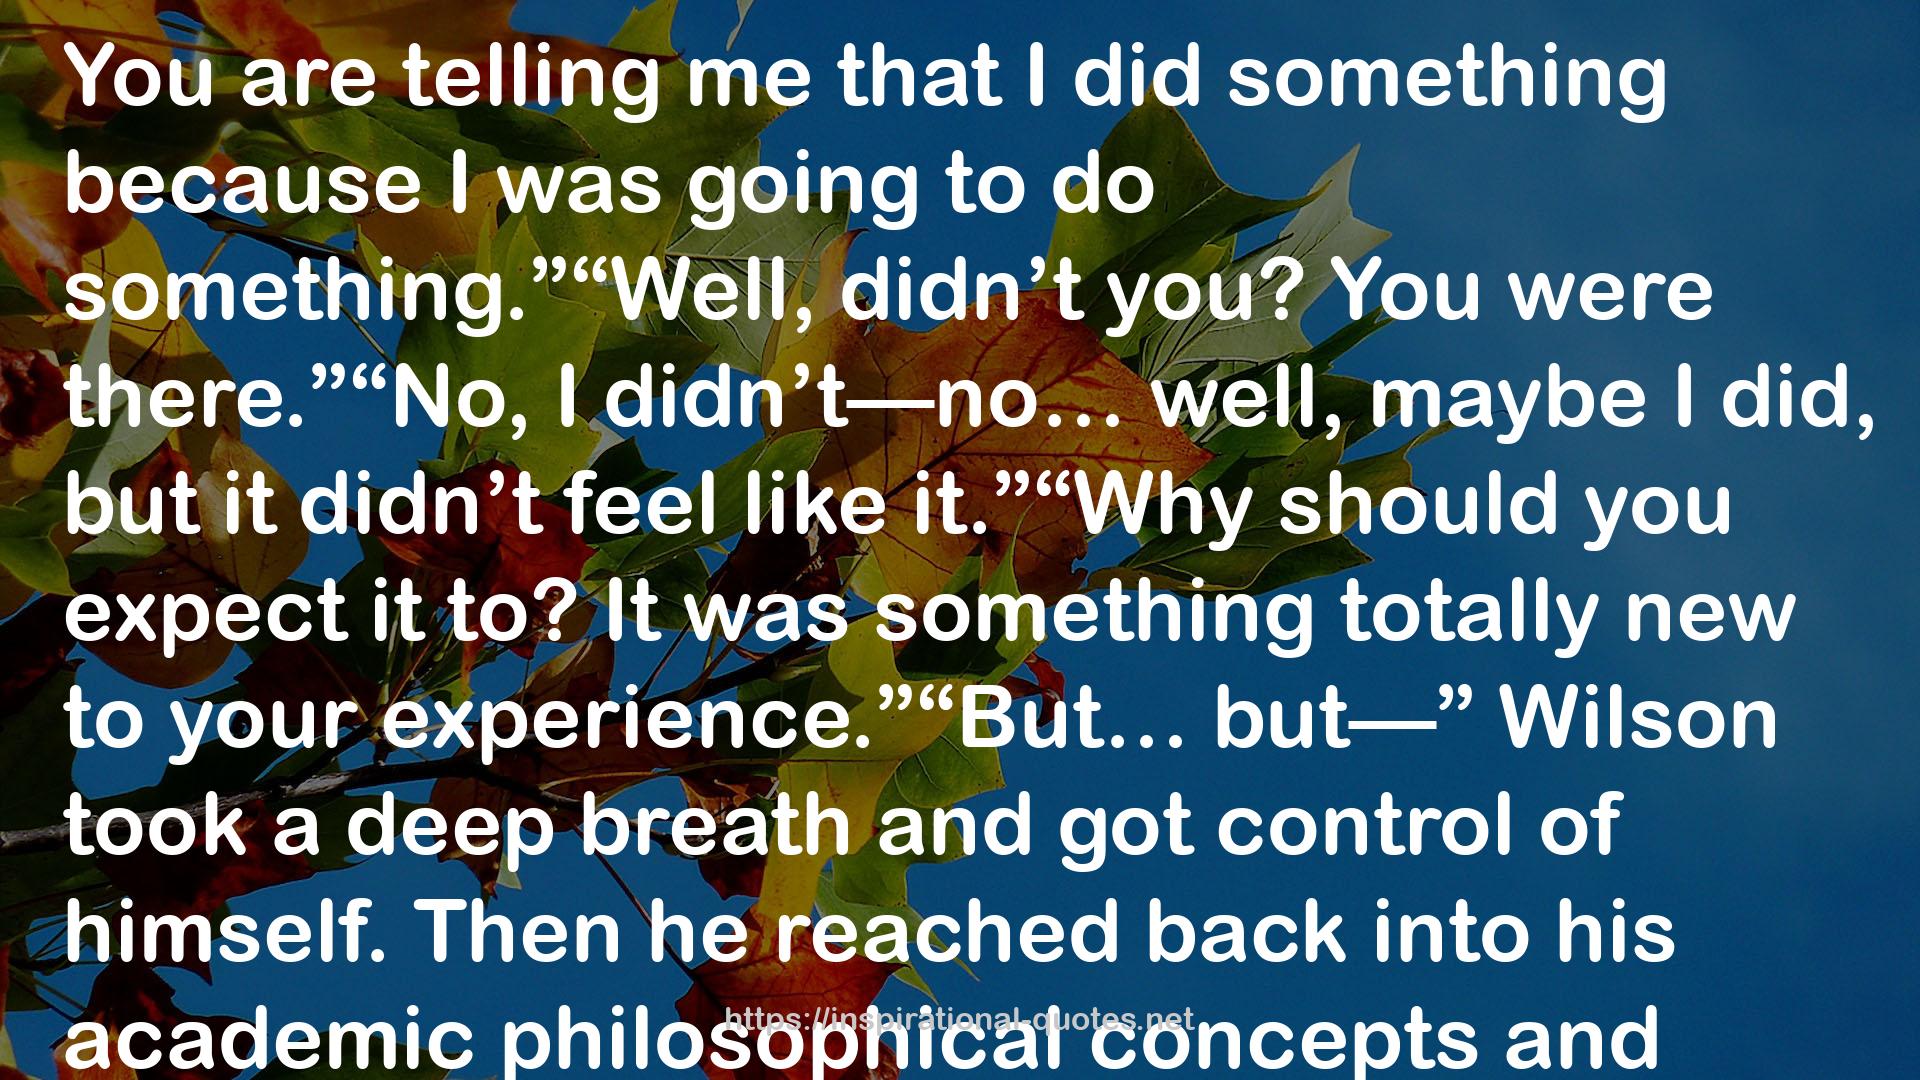 his academic philosophical concepts  QUOTES